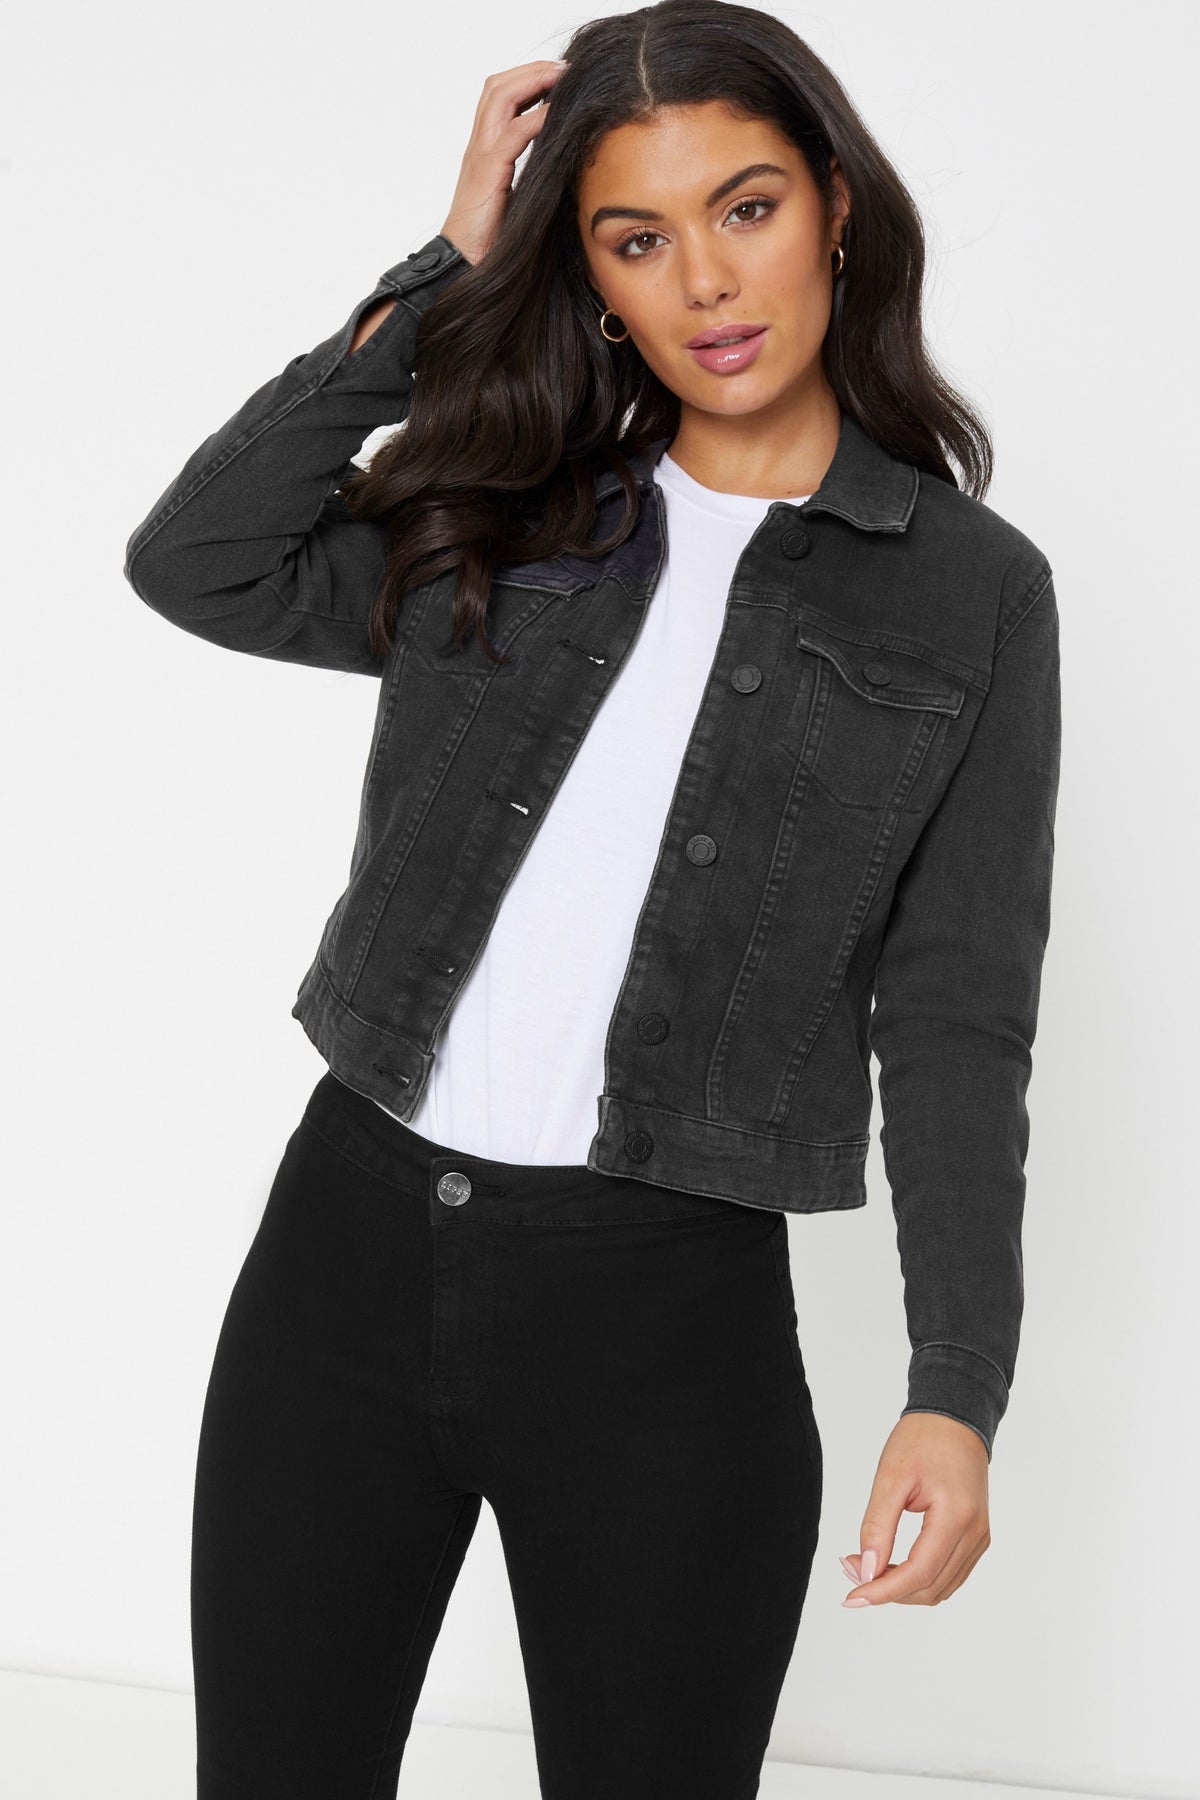 Stylish women's denim jacket in black, featuring button closure and classic look for casual wear.